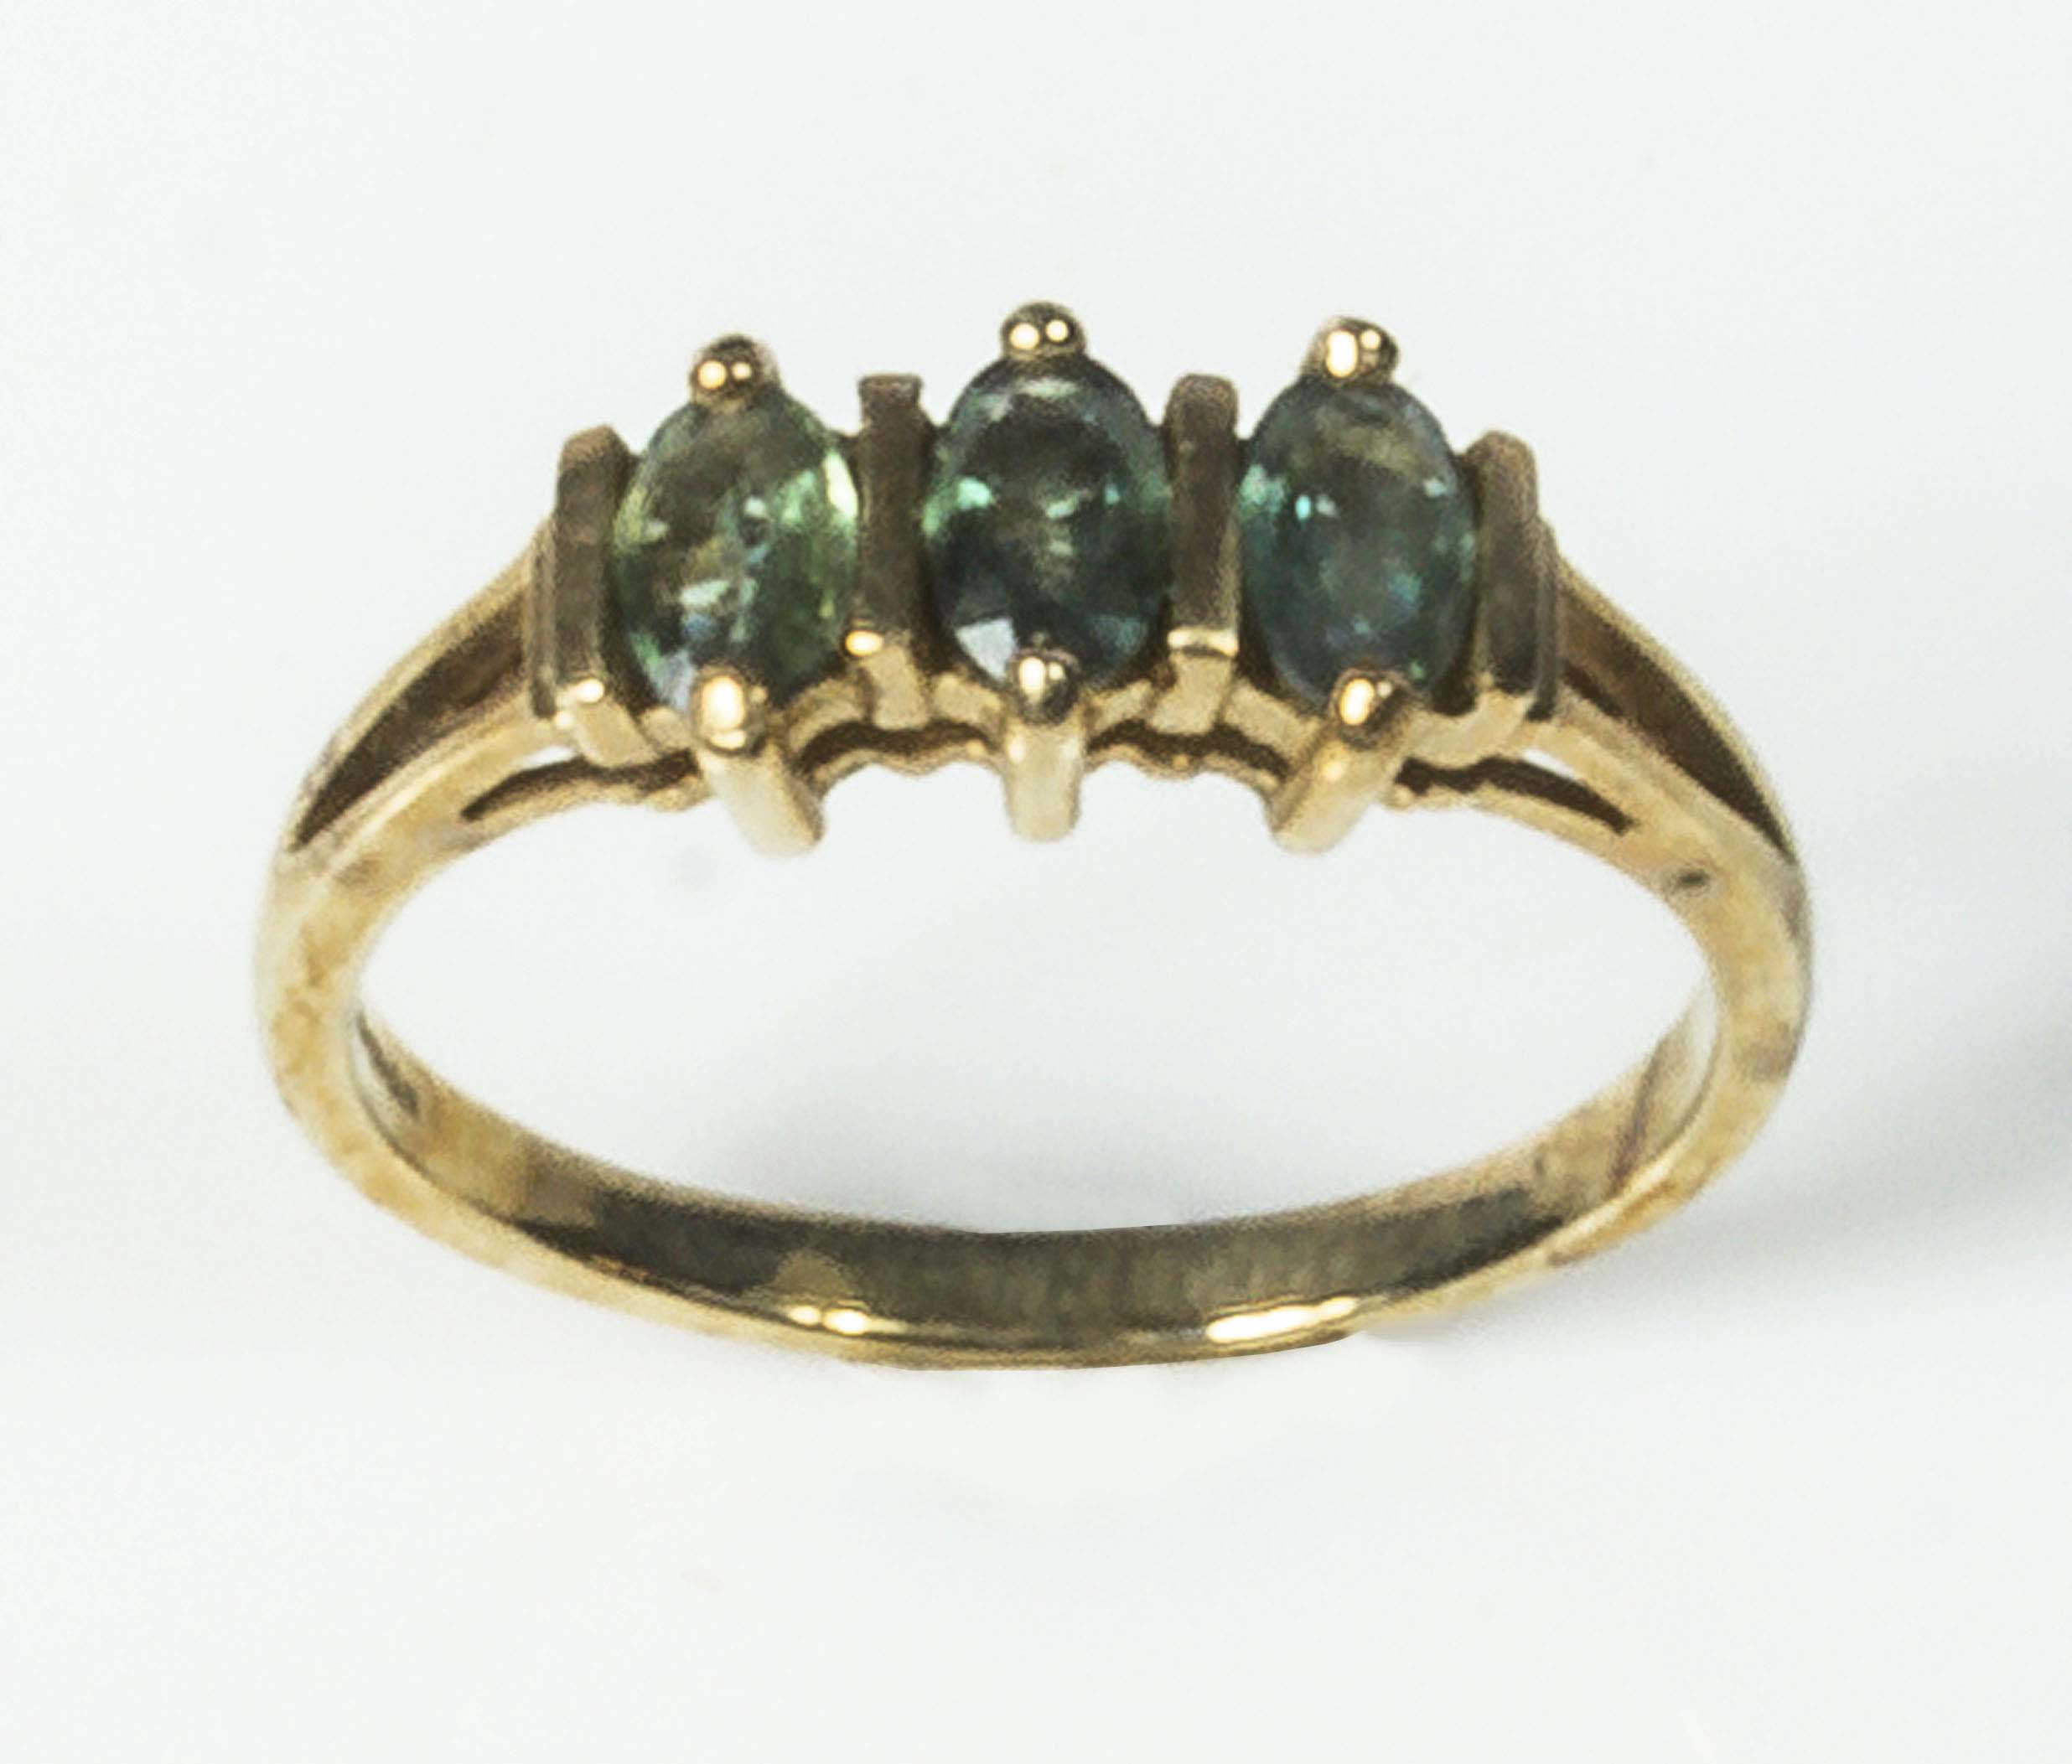 A lady's 9ct gold ring set with three tourmaline stones